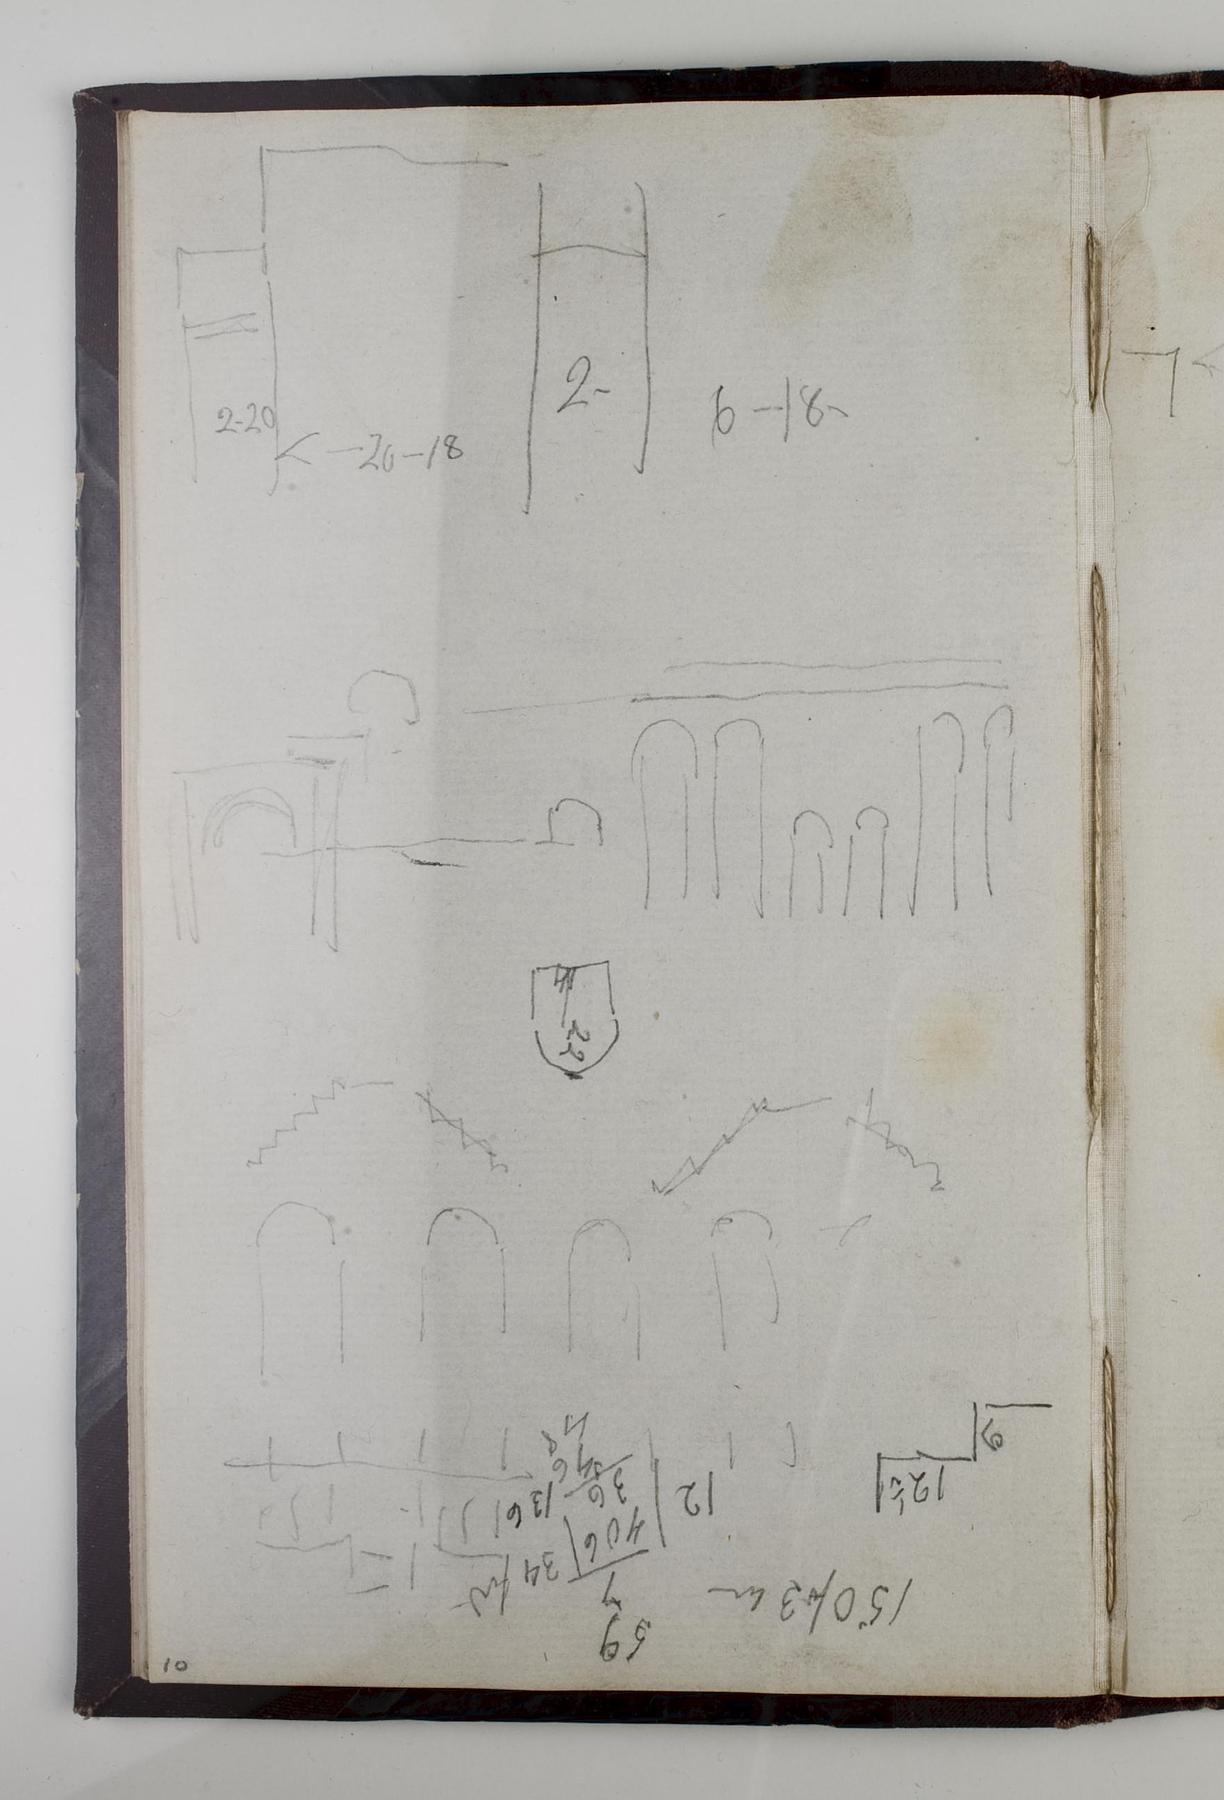 Constructions of Stairs, Survey and Calculations. Colosseum (?), Section, D1778,10